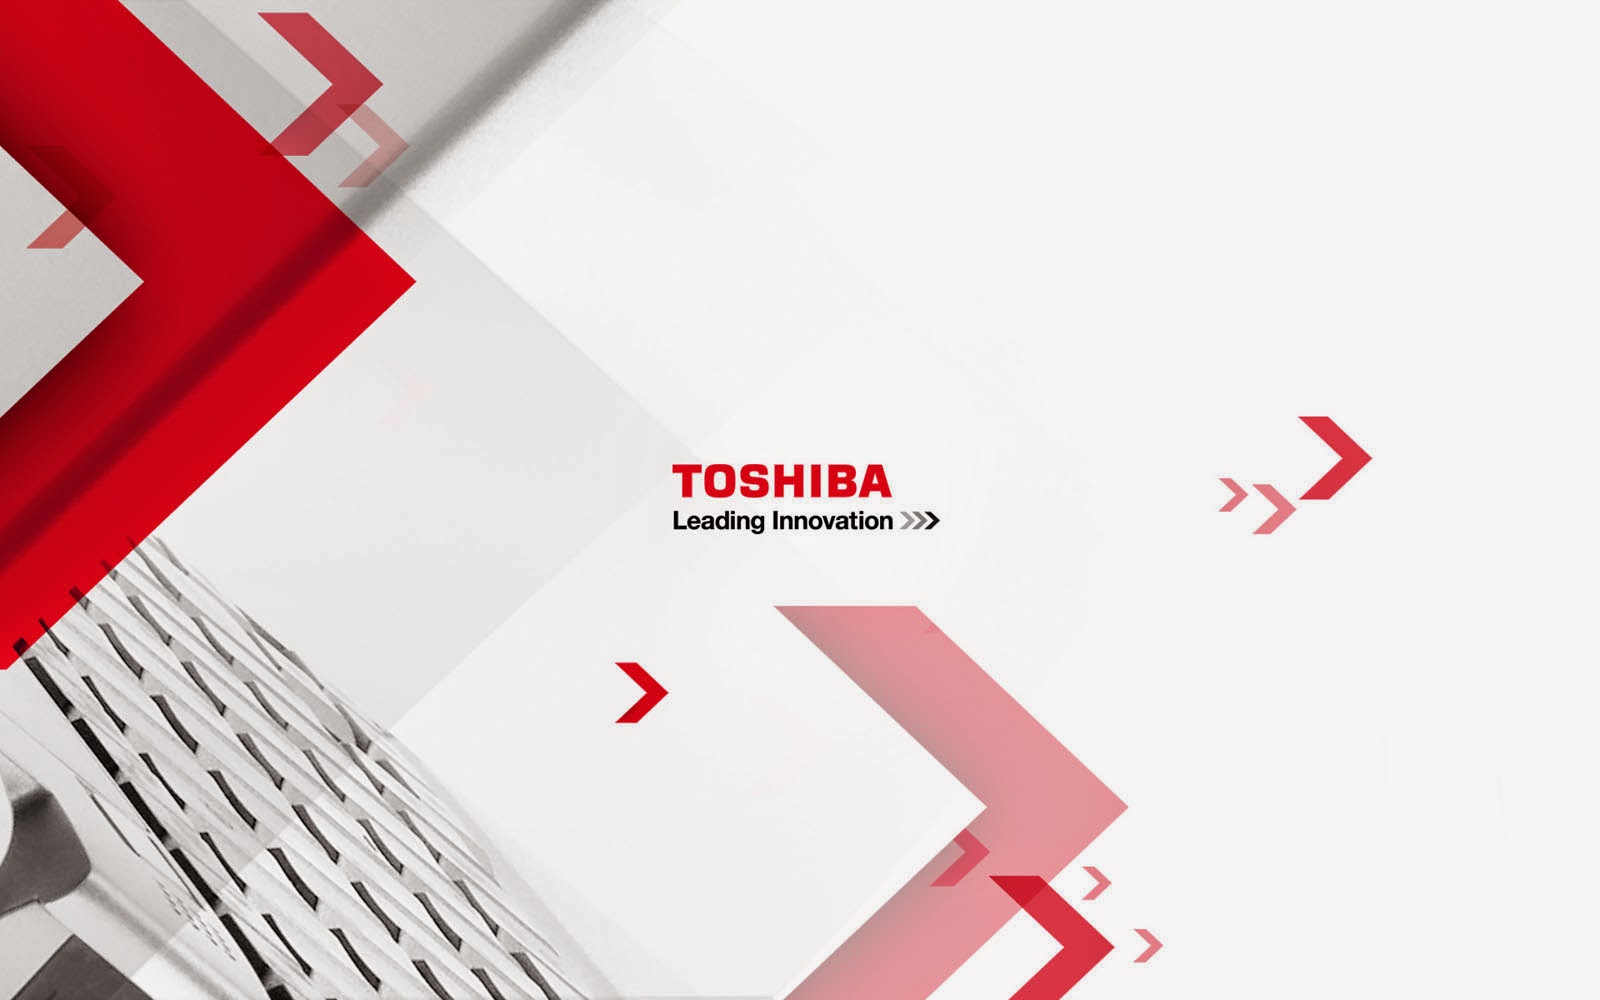 Toshiba Wallpaper Background Photos Image Andpictures For